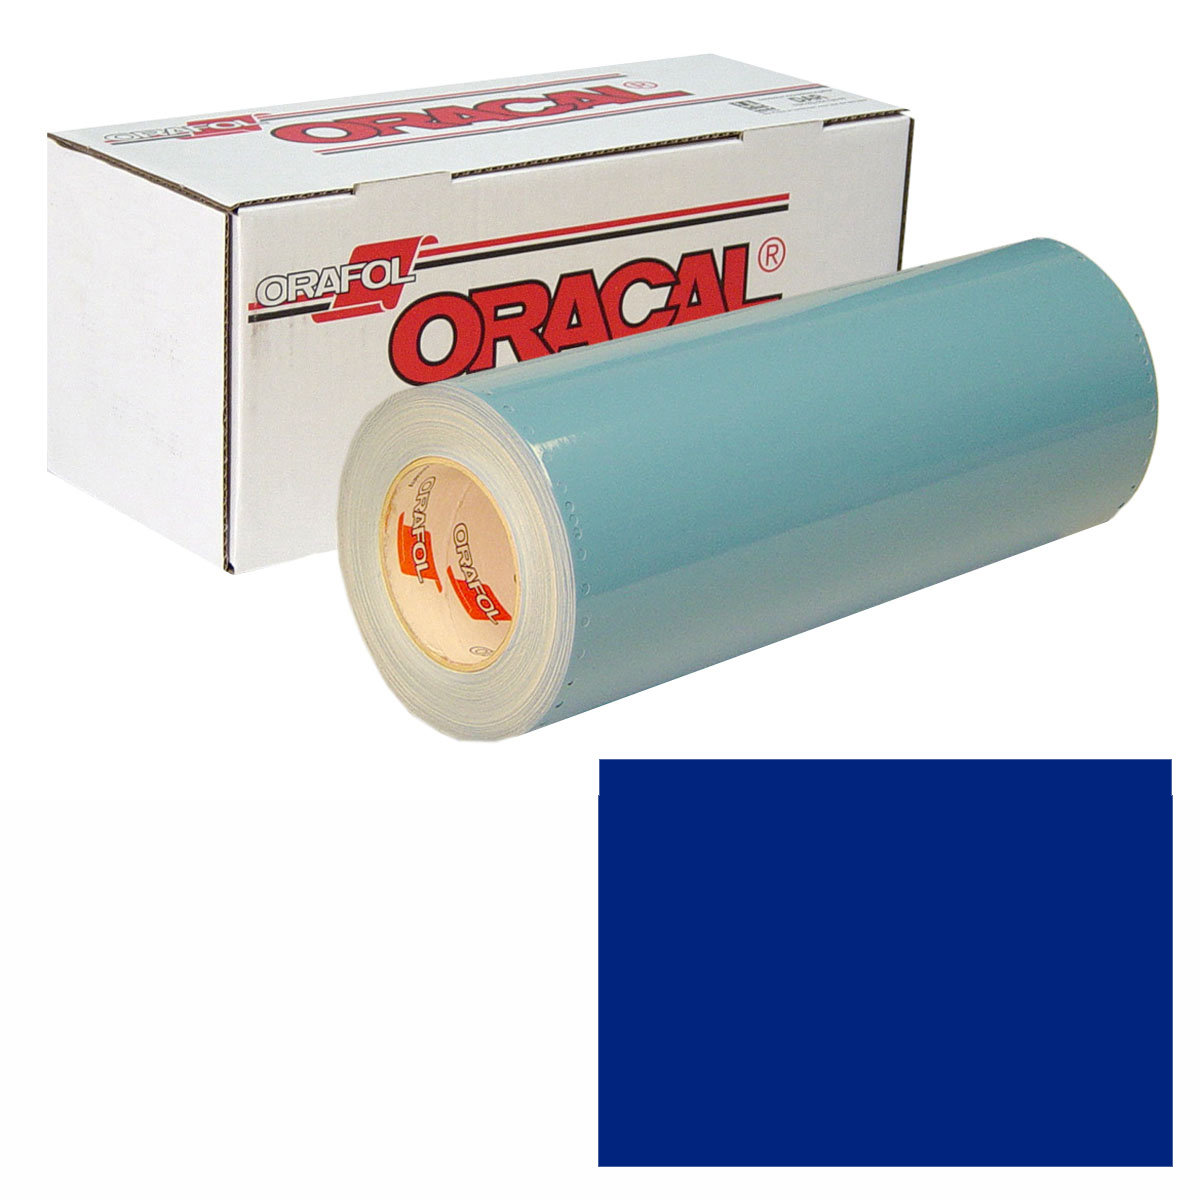 ORACAL 751 30in X 50yd 536 Middle Blue